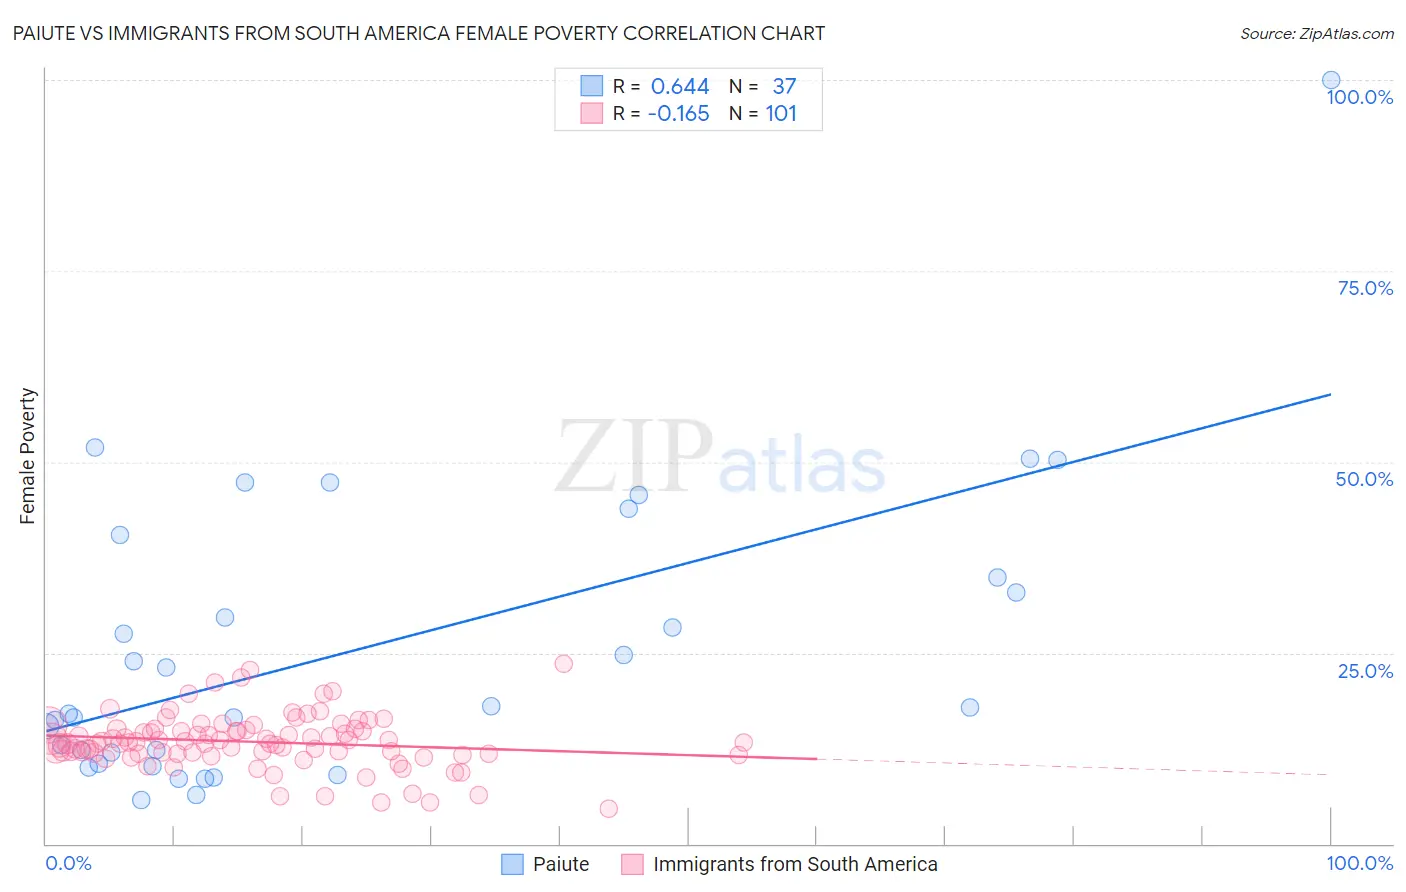 Paiute vs Immigrants from South America Female Poverty